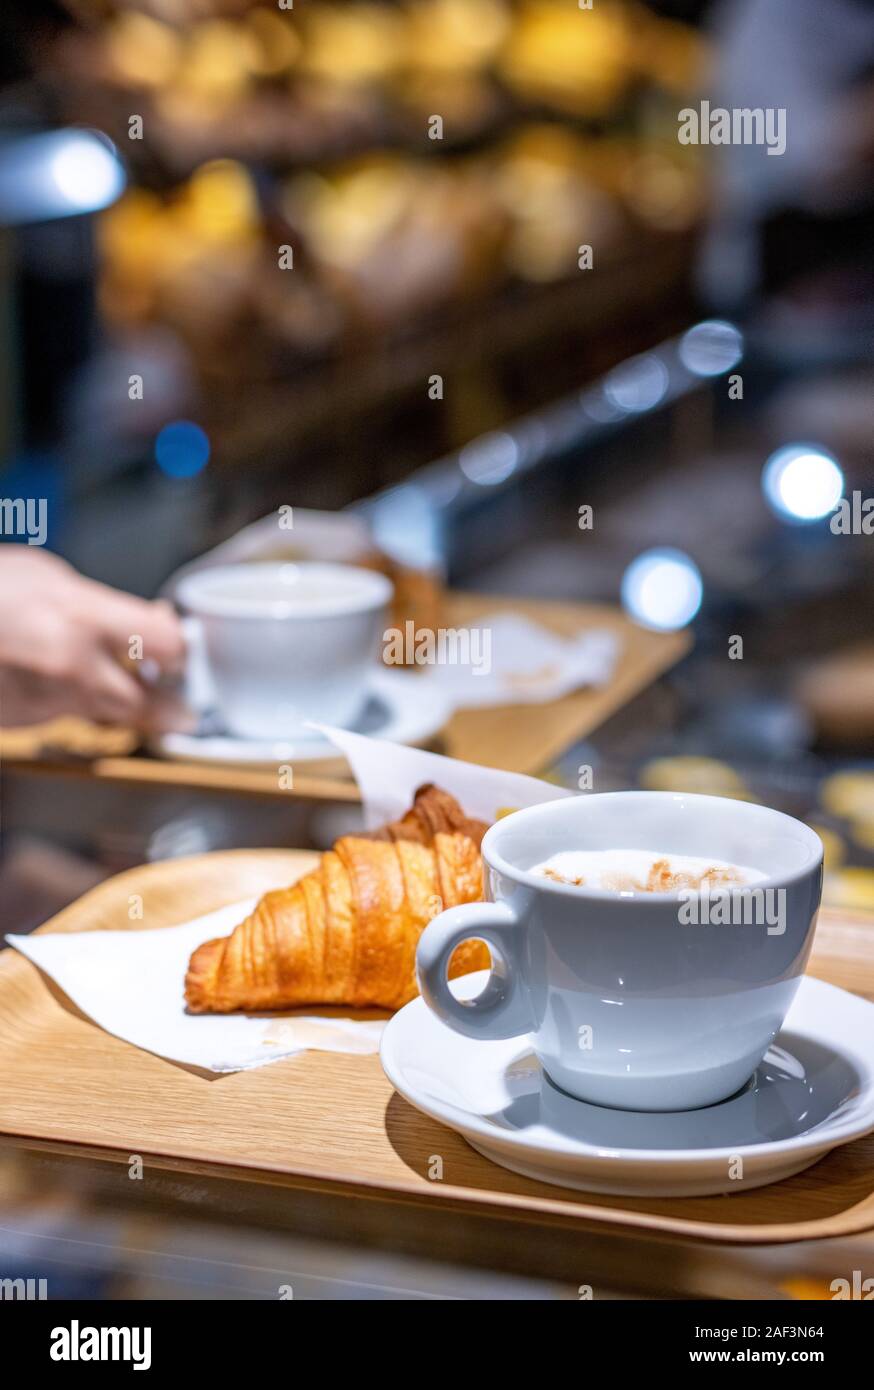 Coffee and croissant served in a tray on the counter in a blurry pastry shop background Stock Photo